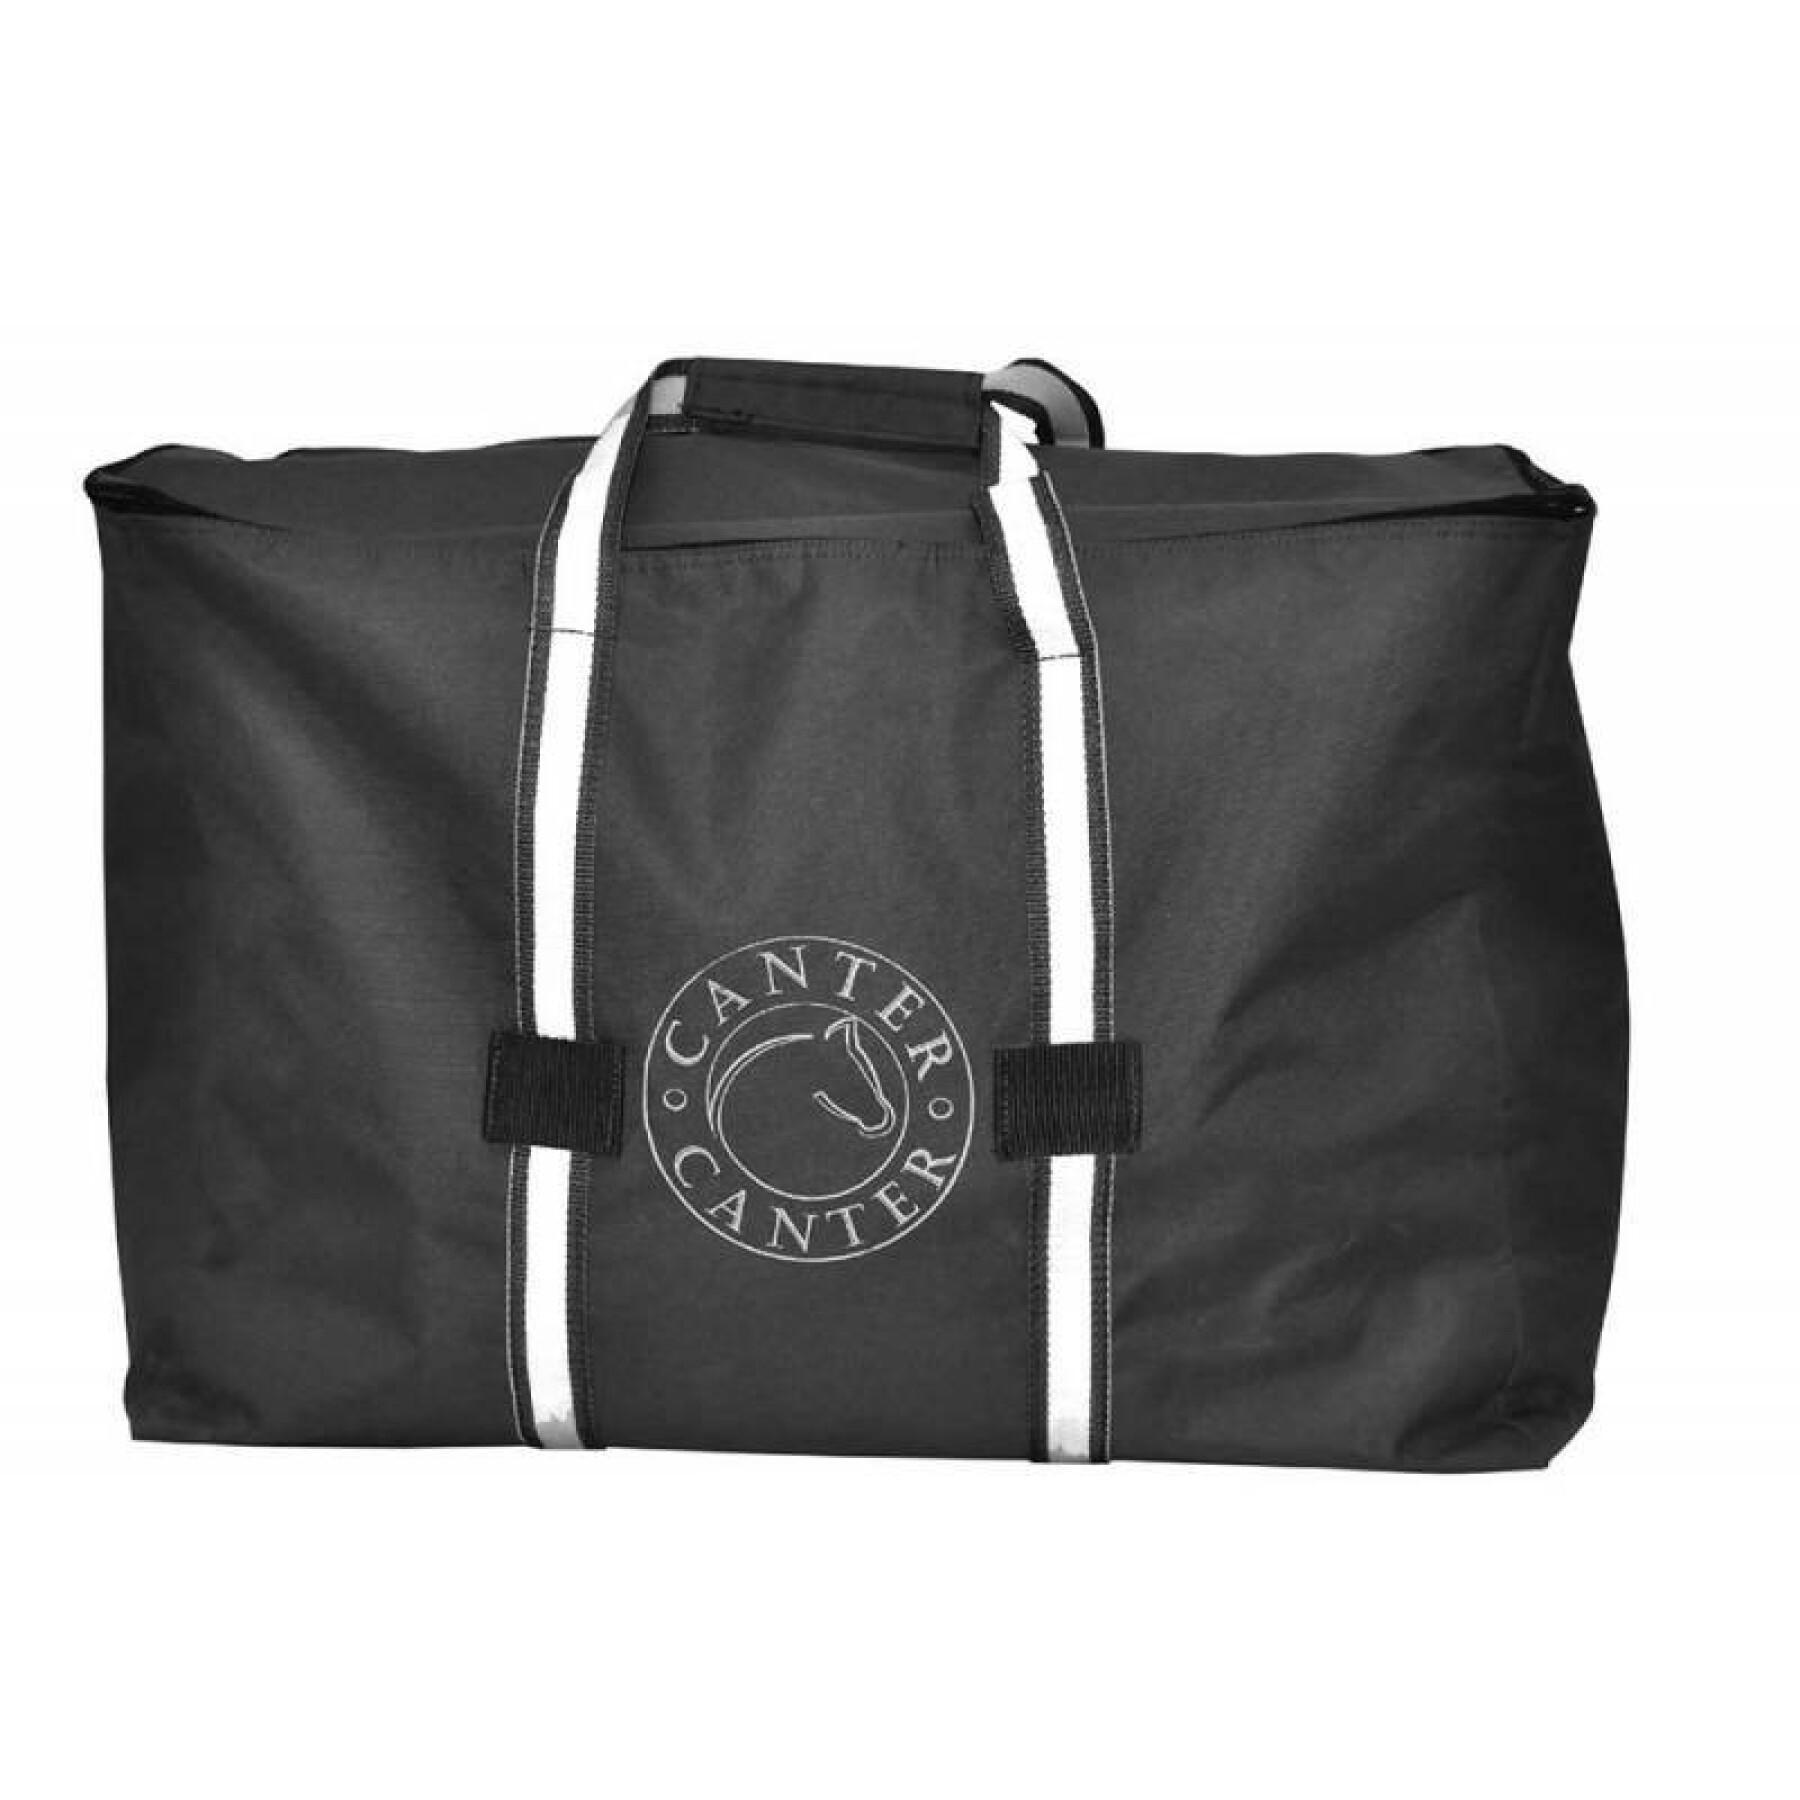 Carrying bag Canter